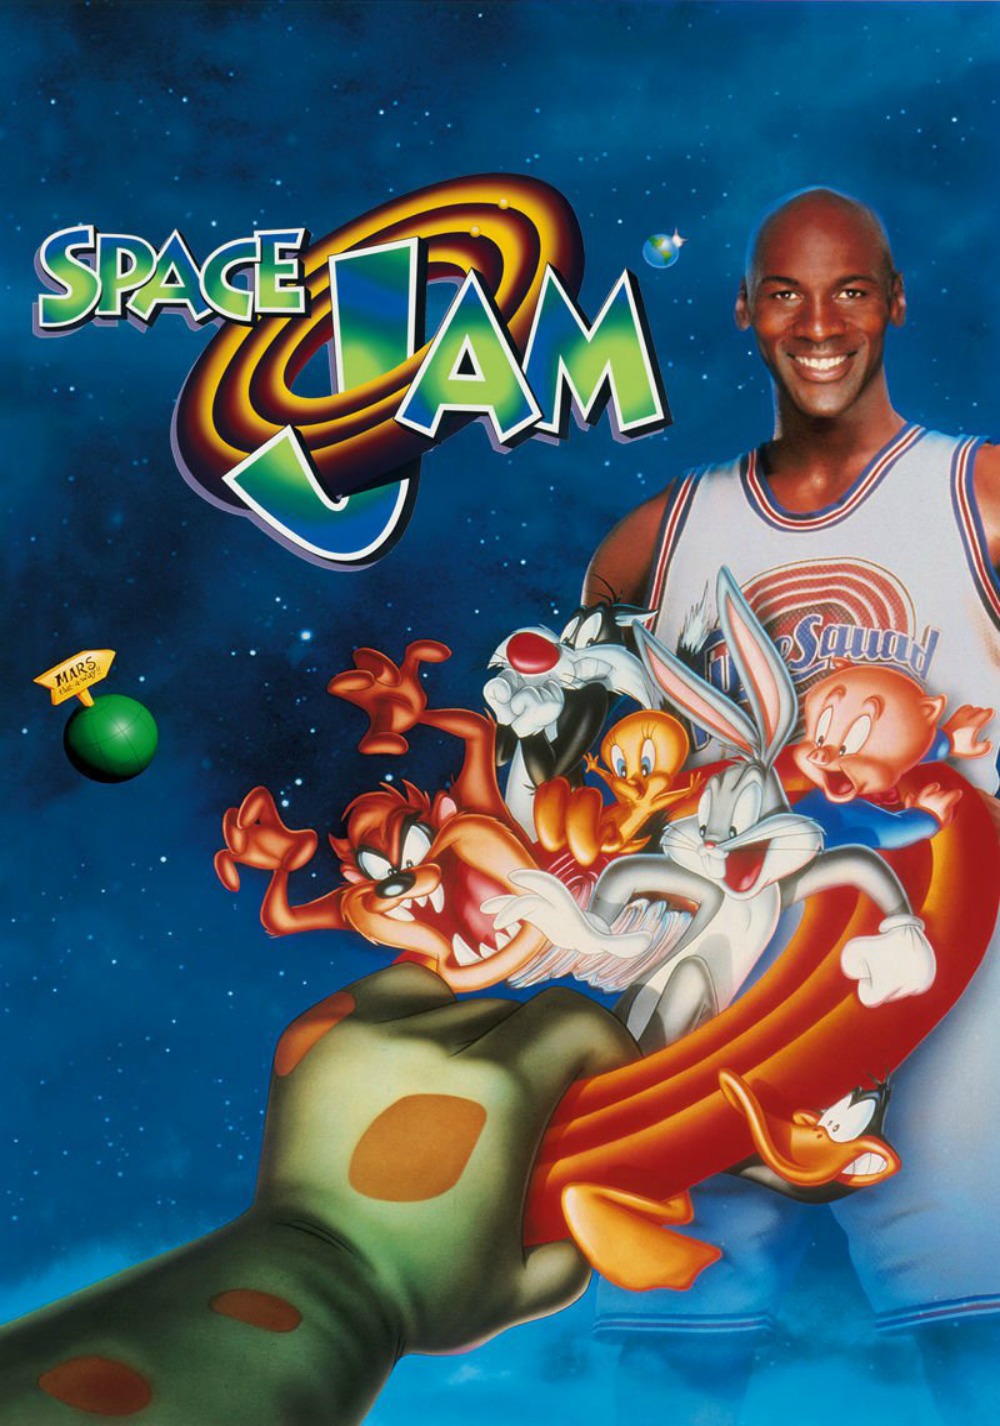 Space Jam 1 Streaming Vf Space Jam Picture - Image Abyss